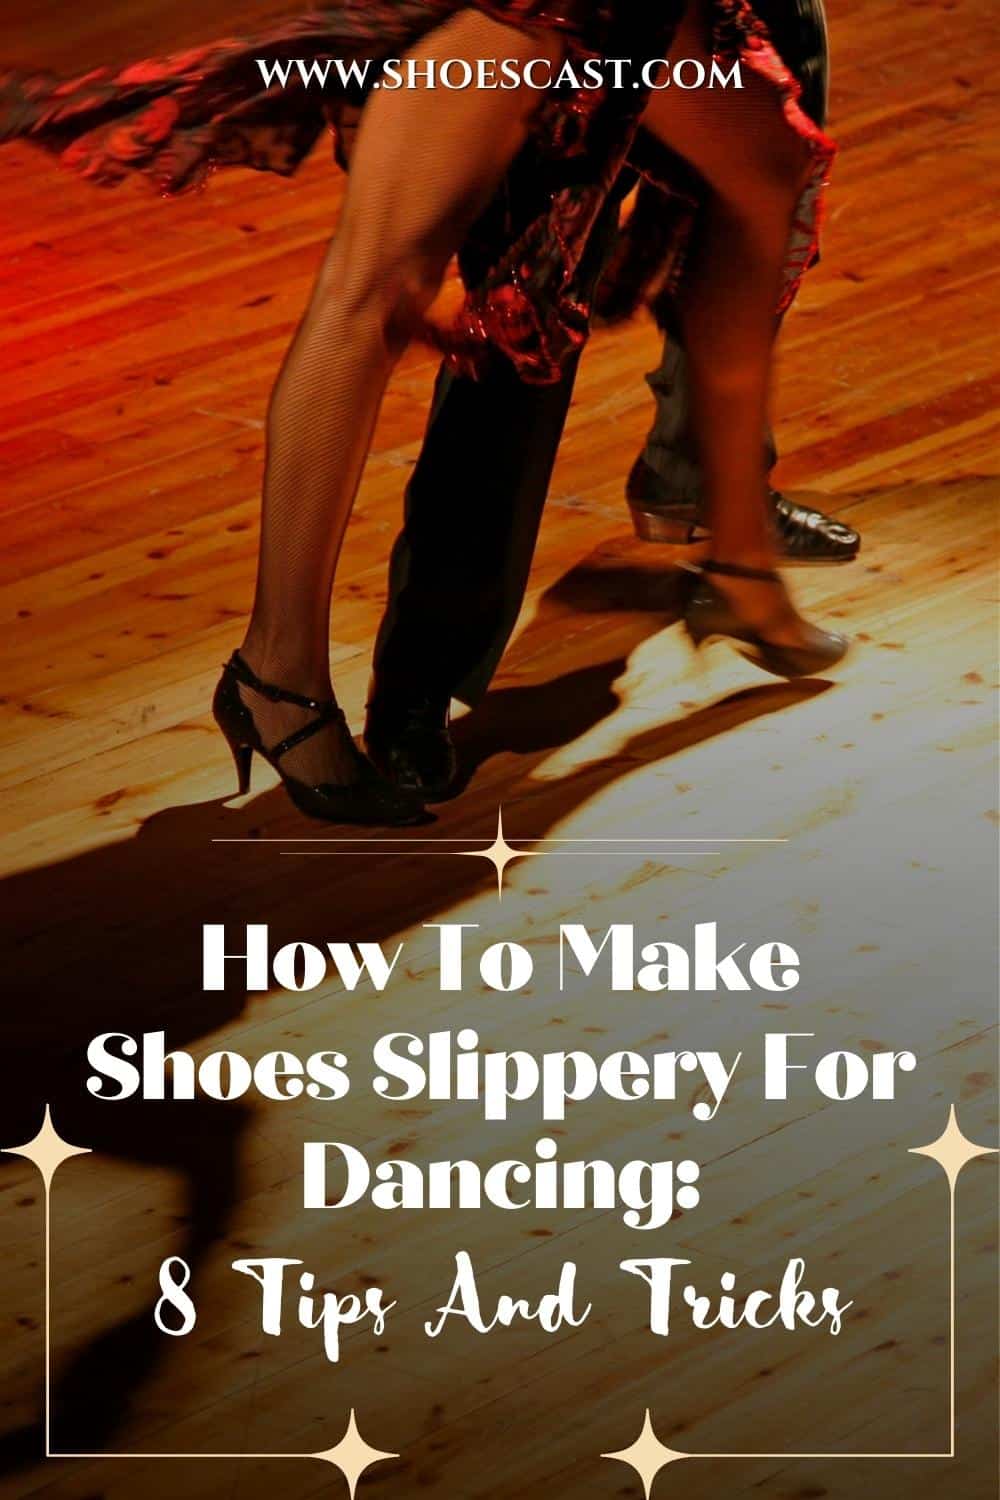 How To Make Shoes Slippery For Dancing: 8 Tips And Tricks